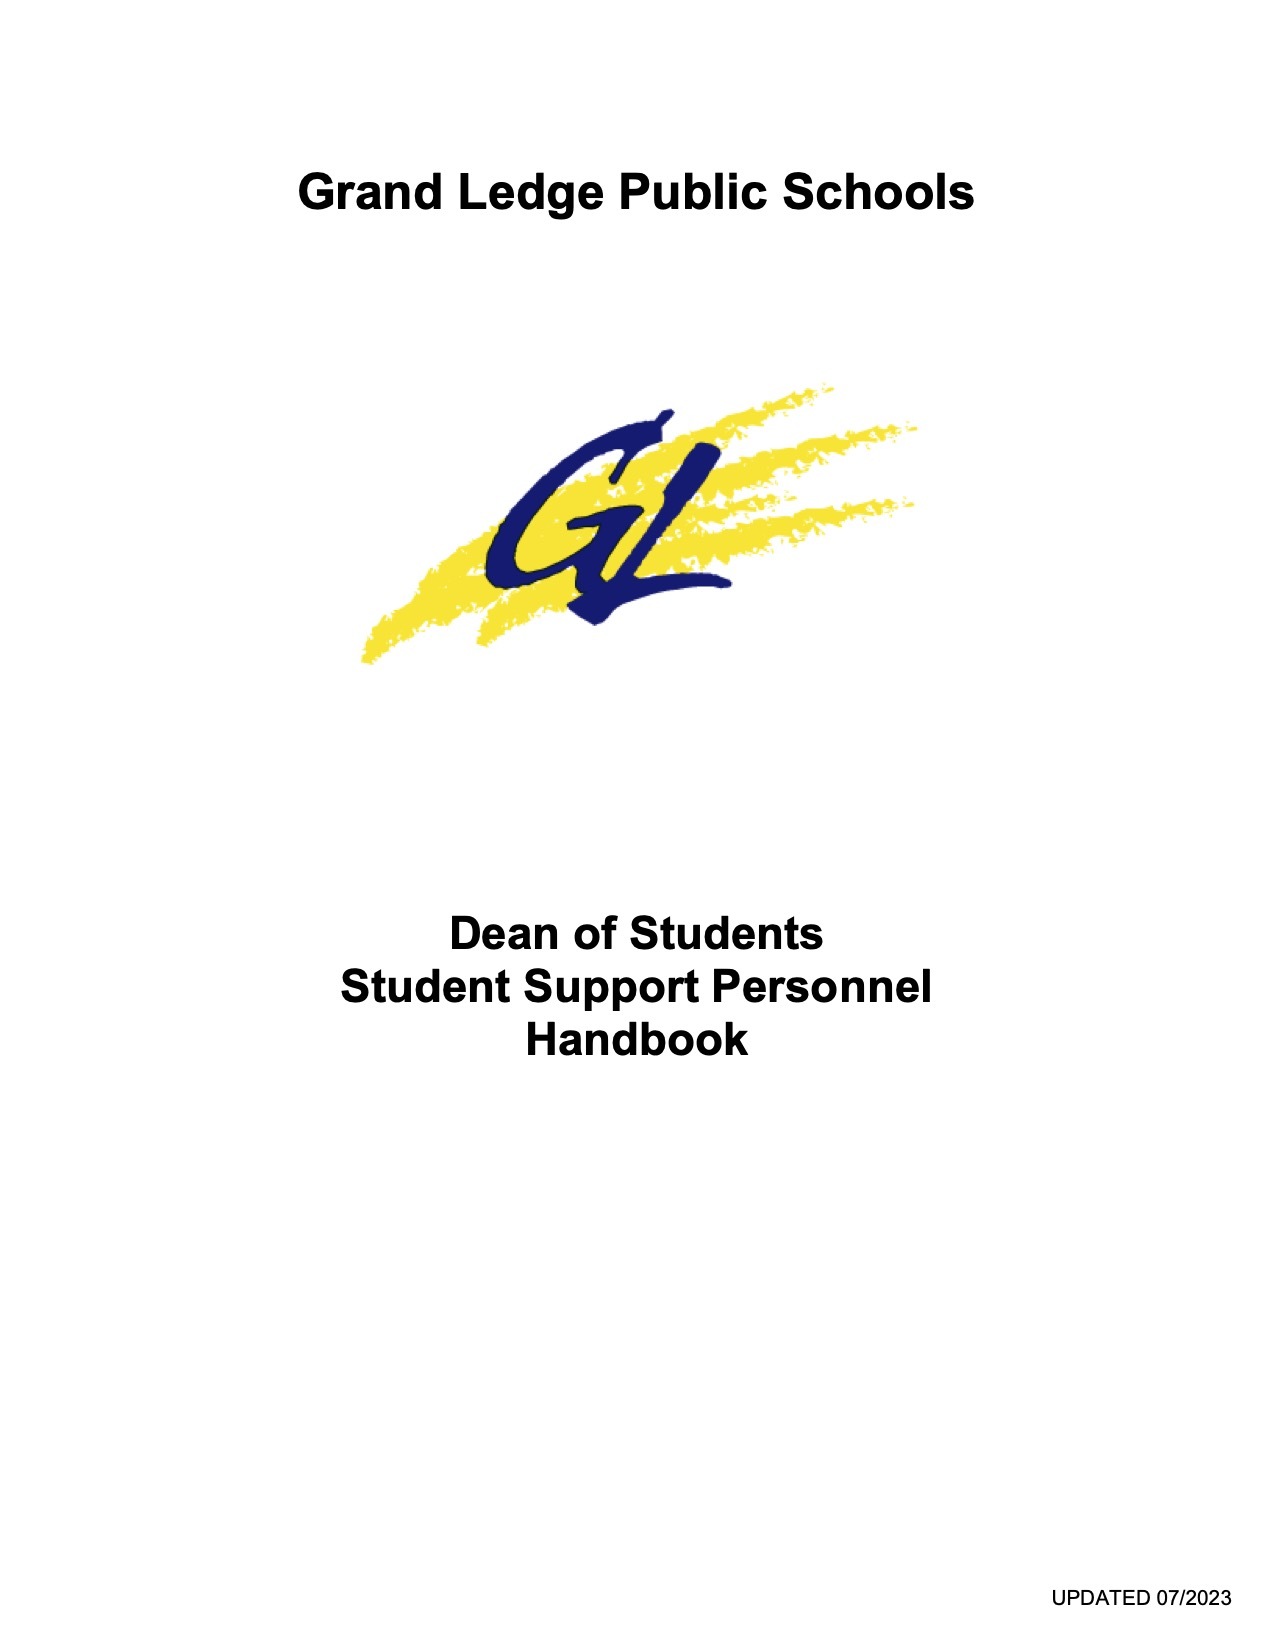 Dean of Students and Student Support Personnel Handbook